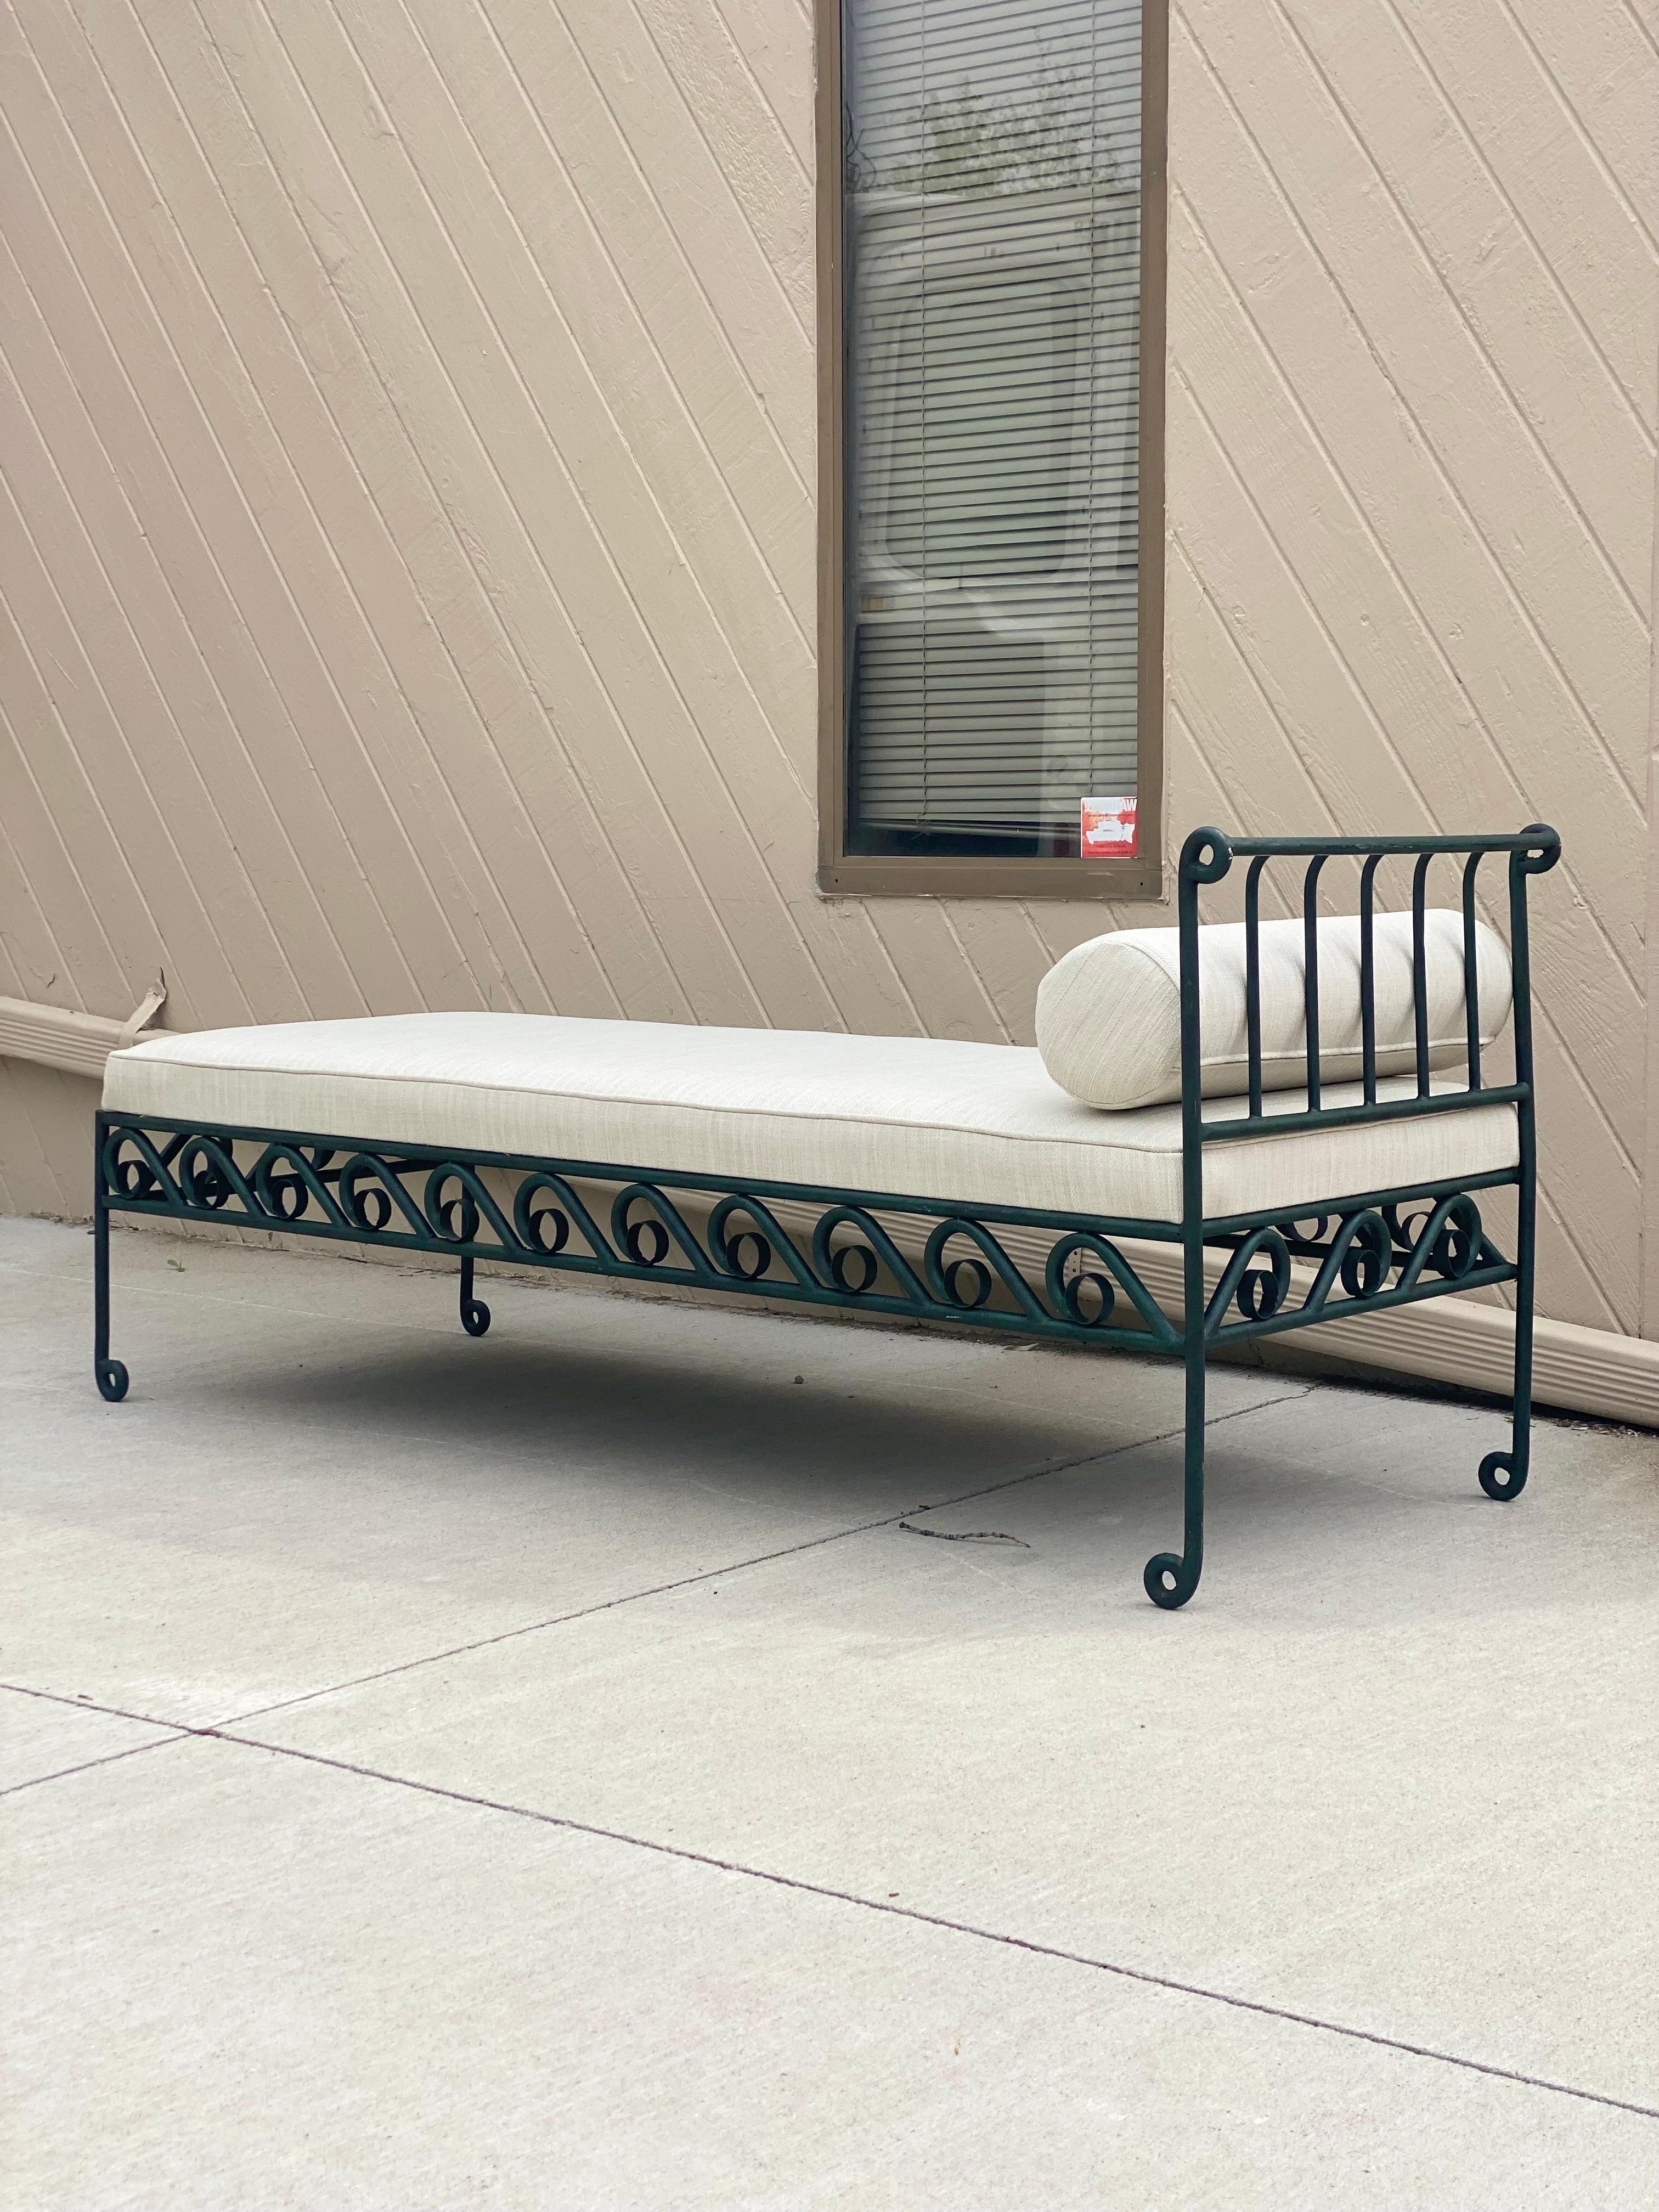 We are very pleased to offer a vintage French daybed, circa the early 20th century. This piece features a low platform and is constructed from solid metal with a powder-coated dark green, matte finish. The frame showcases a Classic swirling pattern